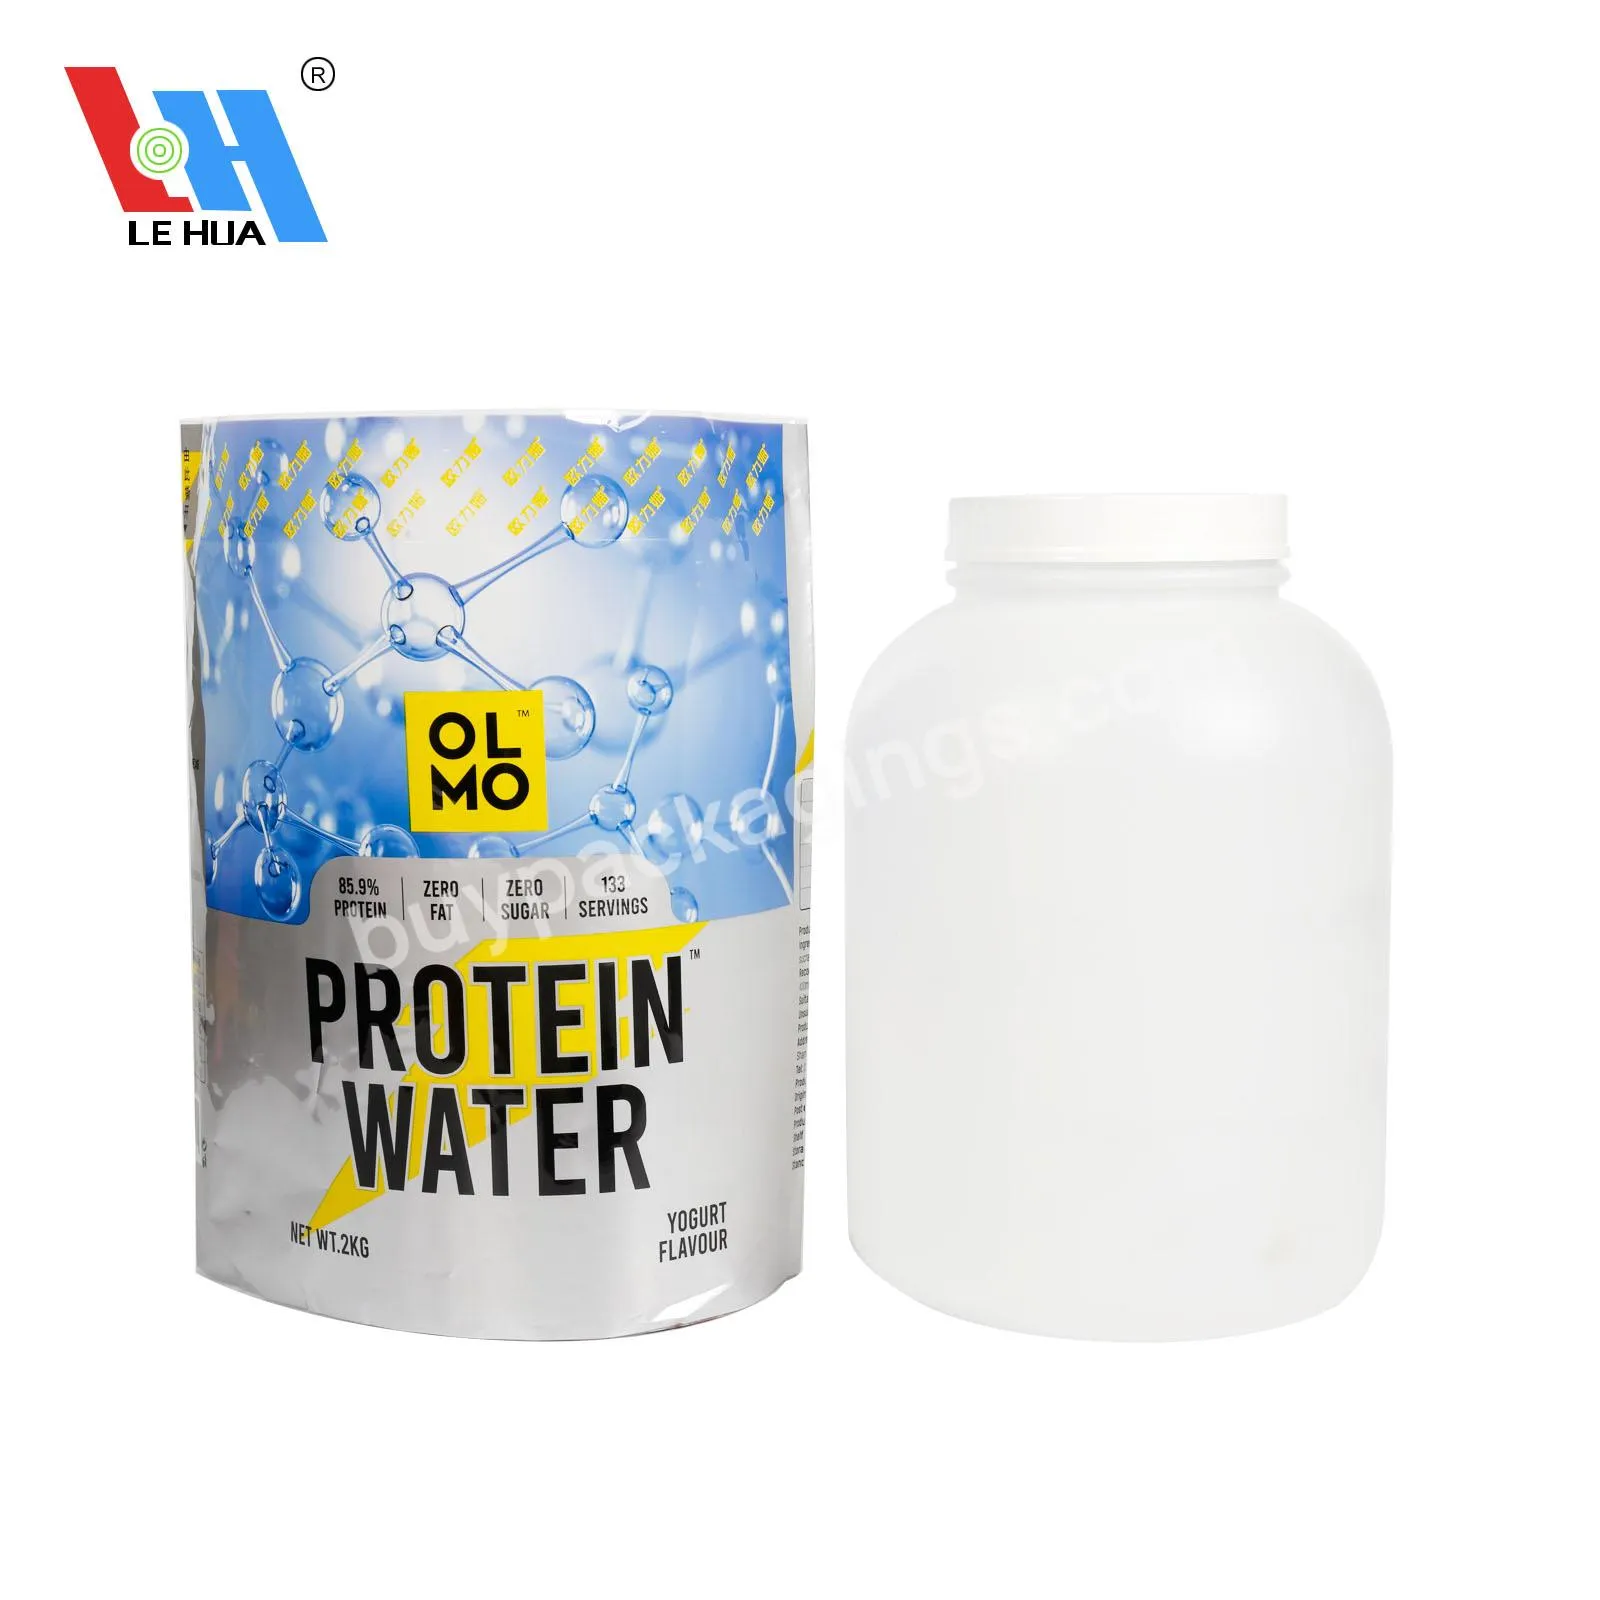 Custom Printed Pvc Heat Shrink Sleeve Labels For Protein Powder Water Bottle - Buy Pet Material Shrink Film For Energy Nutrition Container/whey Powder Bottle,Pvc Material Shrink Film For Vitamin/energy Protein Bottle Shrink Wrap Label,Shrinkage Sleev